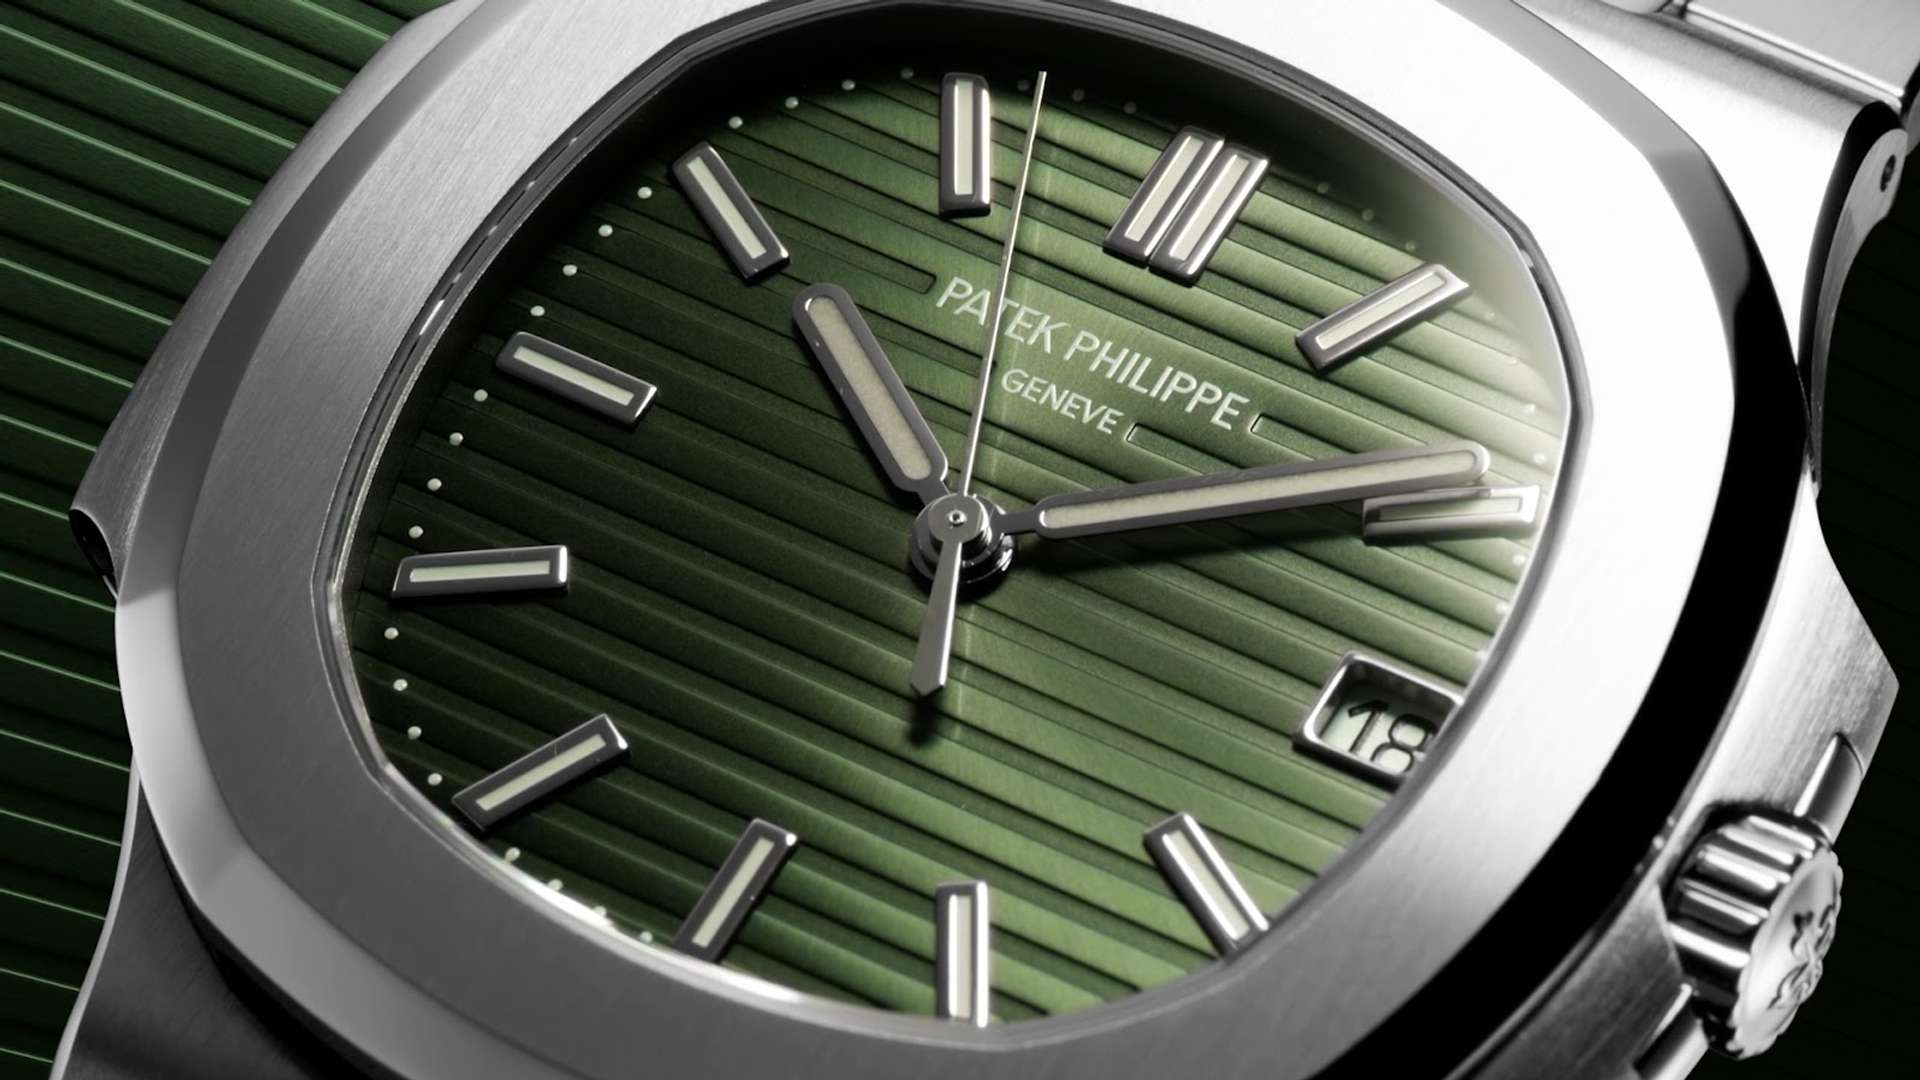 A Patek Philippe Nautilus, first launched in 1976. The image is a close up of the watch face, which is green and set within a silver metal setting.